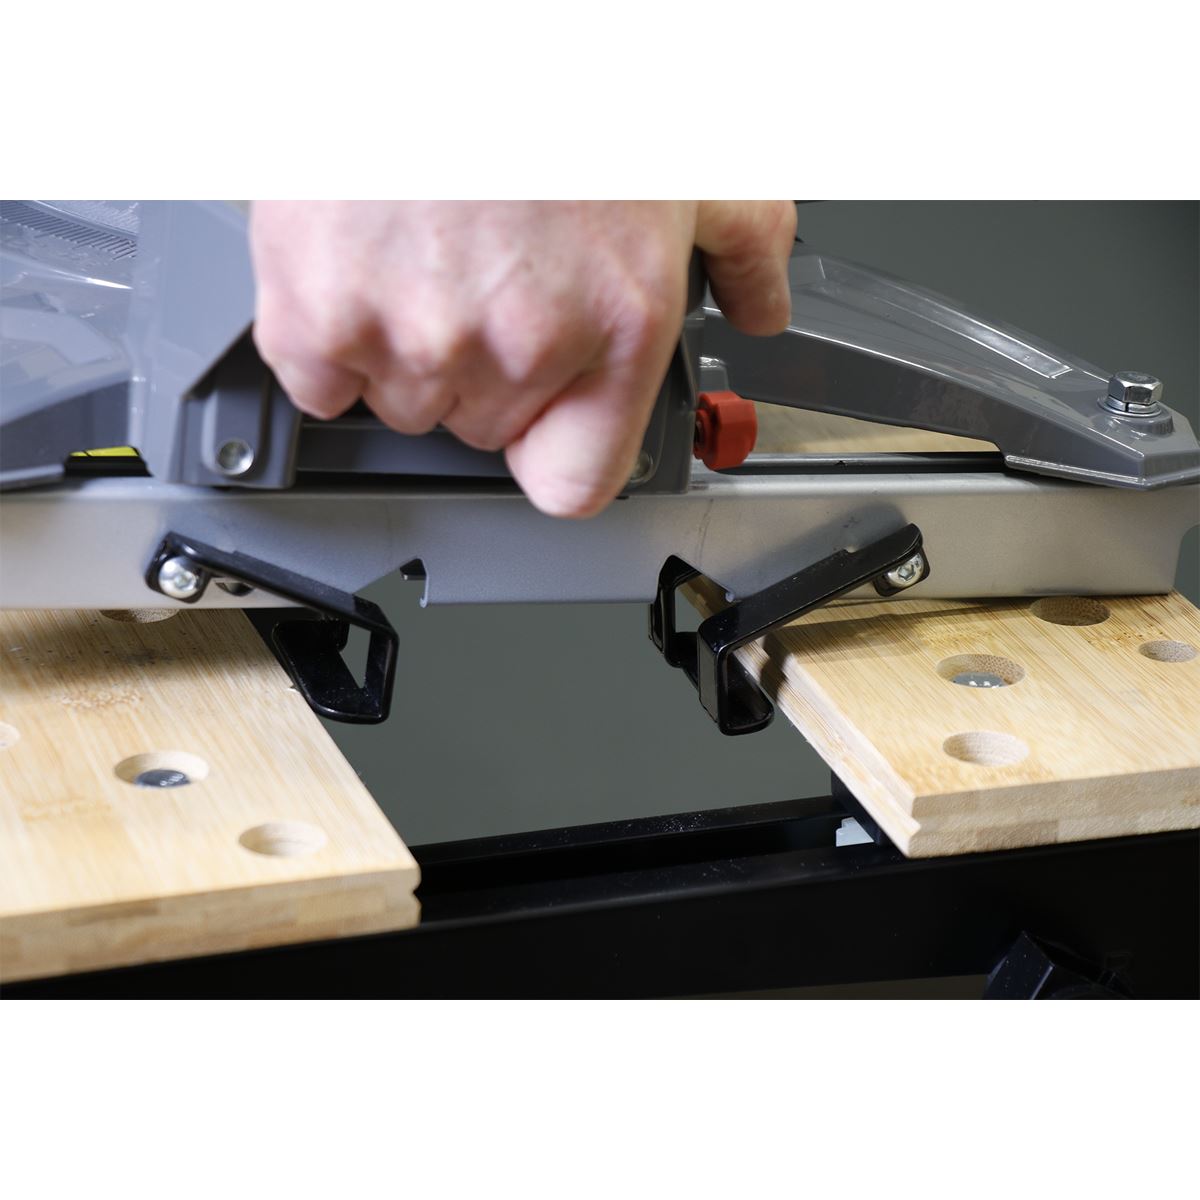 Benchclaw™ Fit to Power Tools and Easily Mount on Workbenches